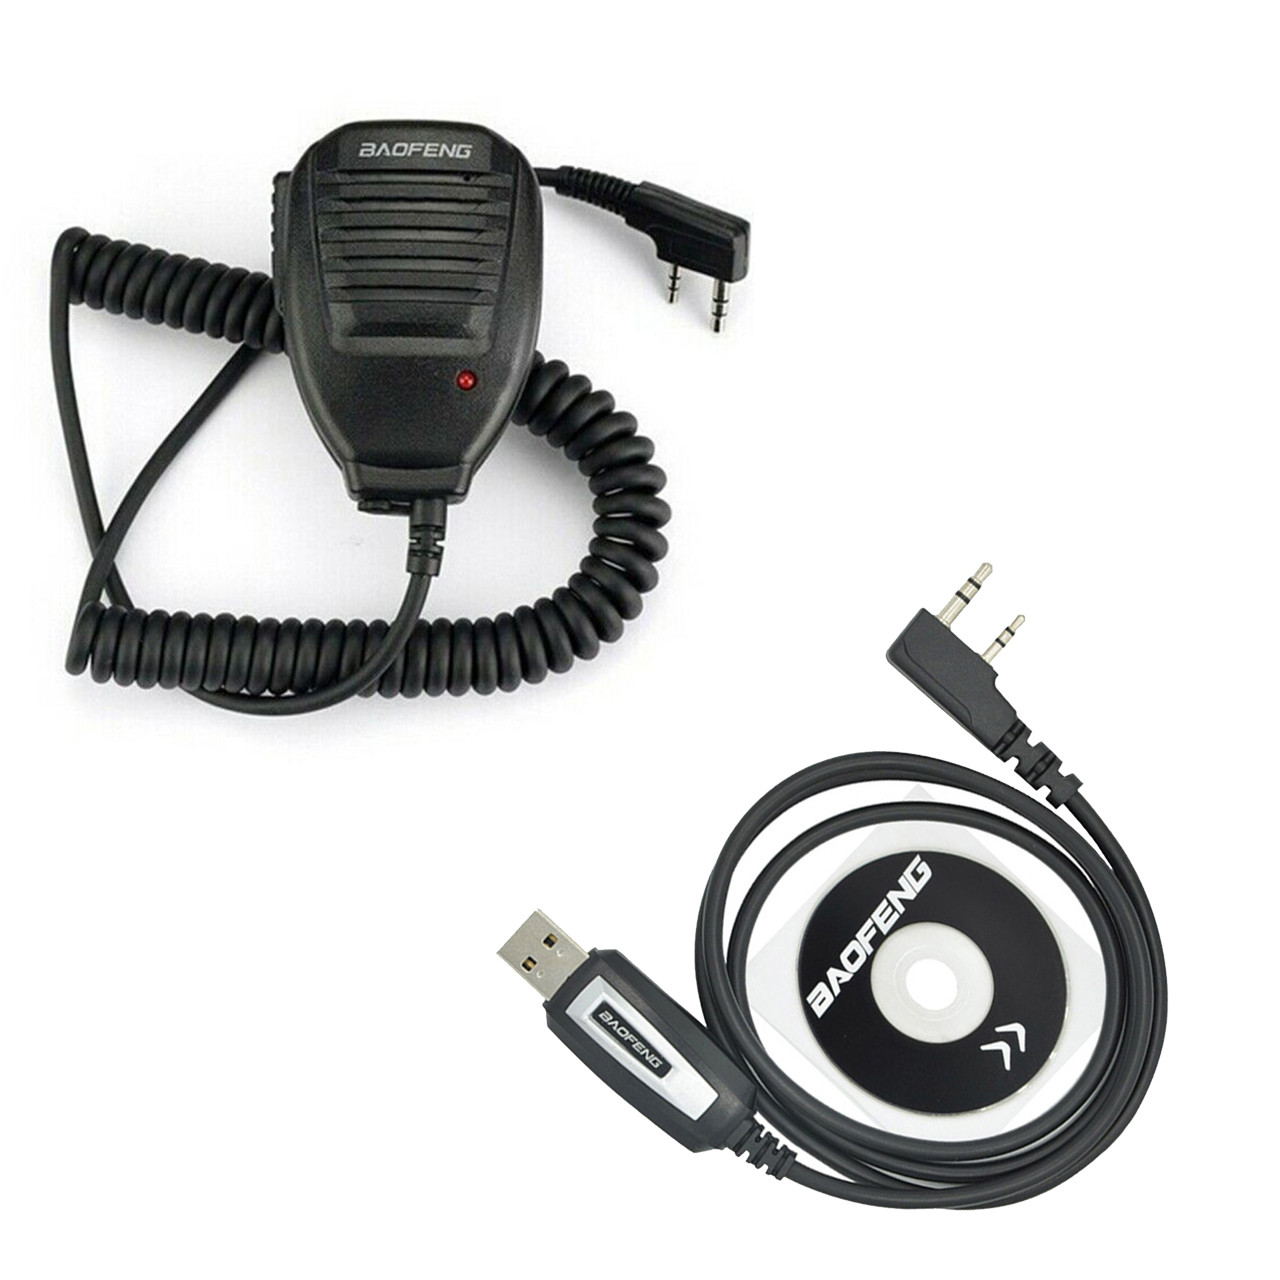 4PCS Baofeng BF-88E PMR 446 Walkie Talkie 0.5 W UHF 446 MHz 16 CH Handheld  Ham Two-way Radio with USB Charger for EU User